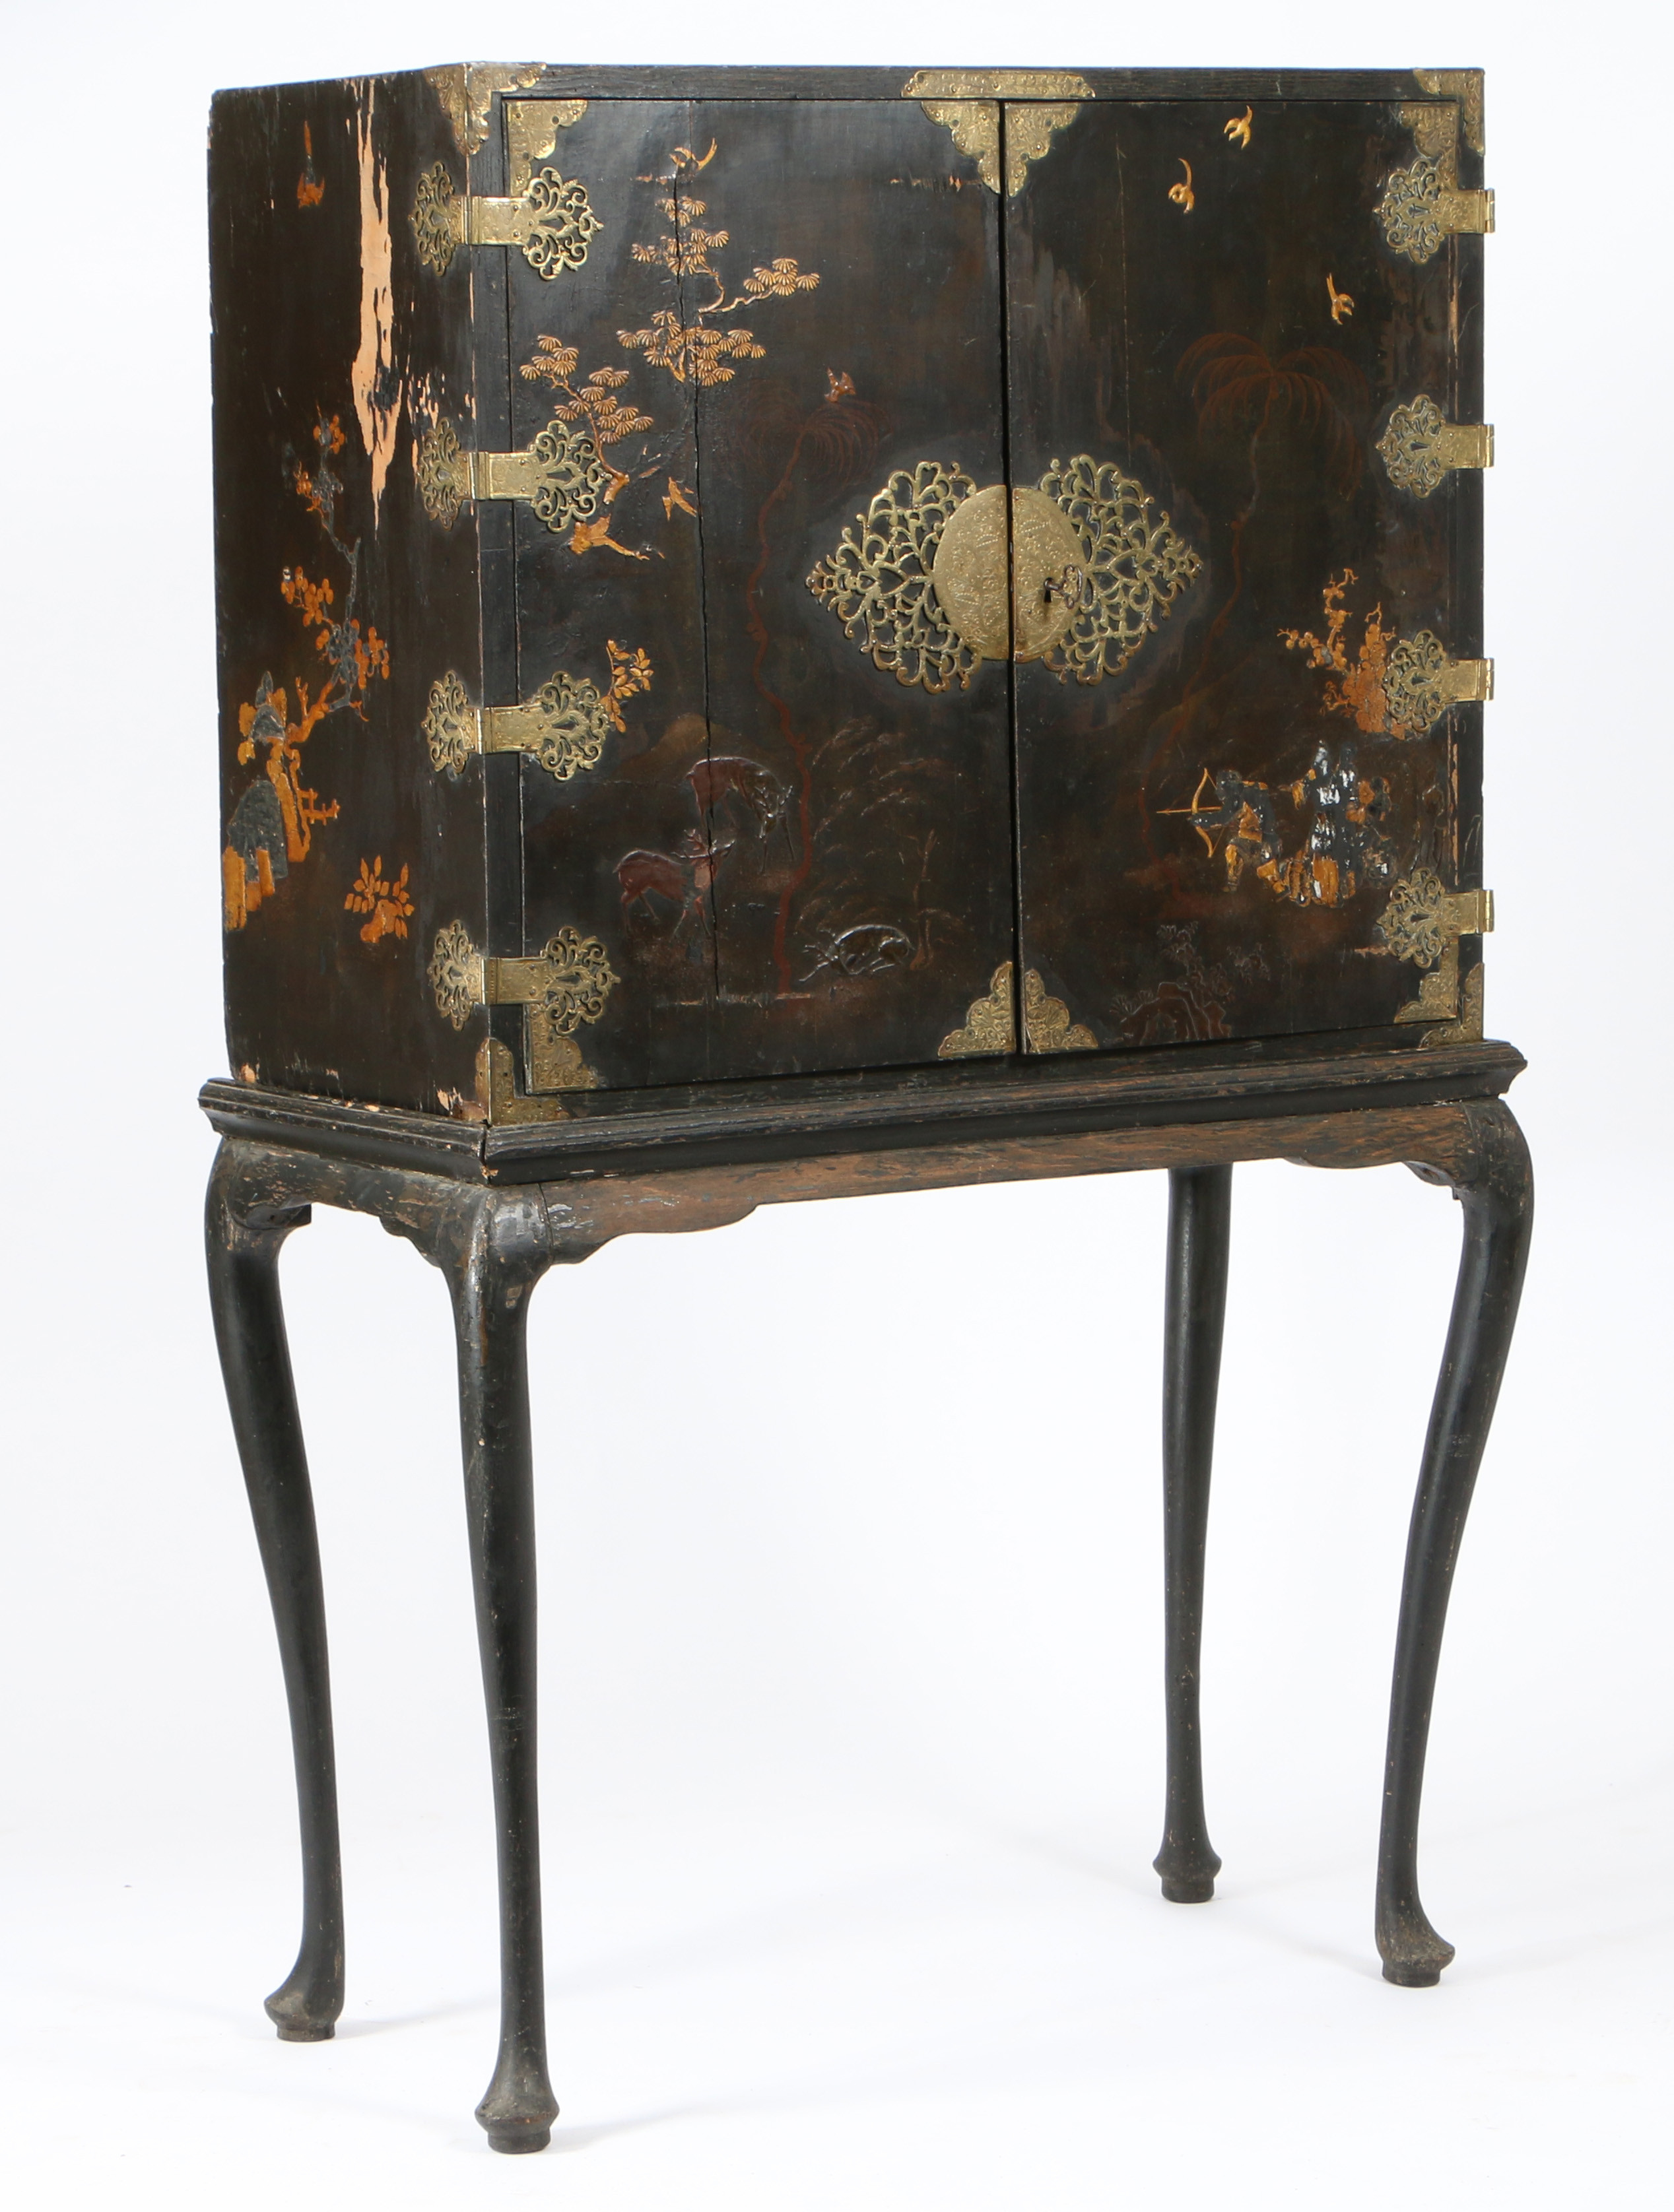 AN EARLY 18TH CENTURY JAPANESE EXPORT BLACK LACQUERED CABINET-ON-STAND, CIRCA 1720. - Image 4 of 4